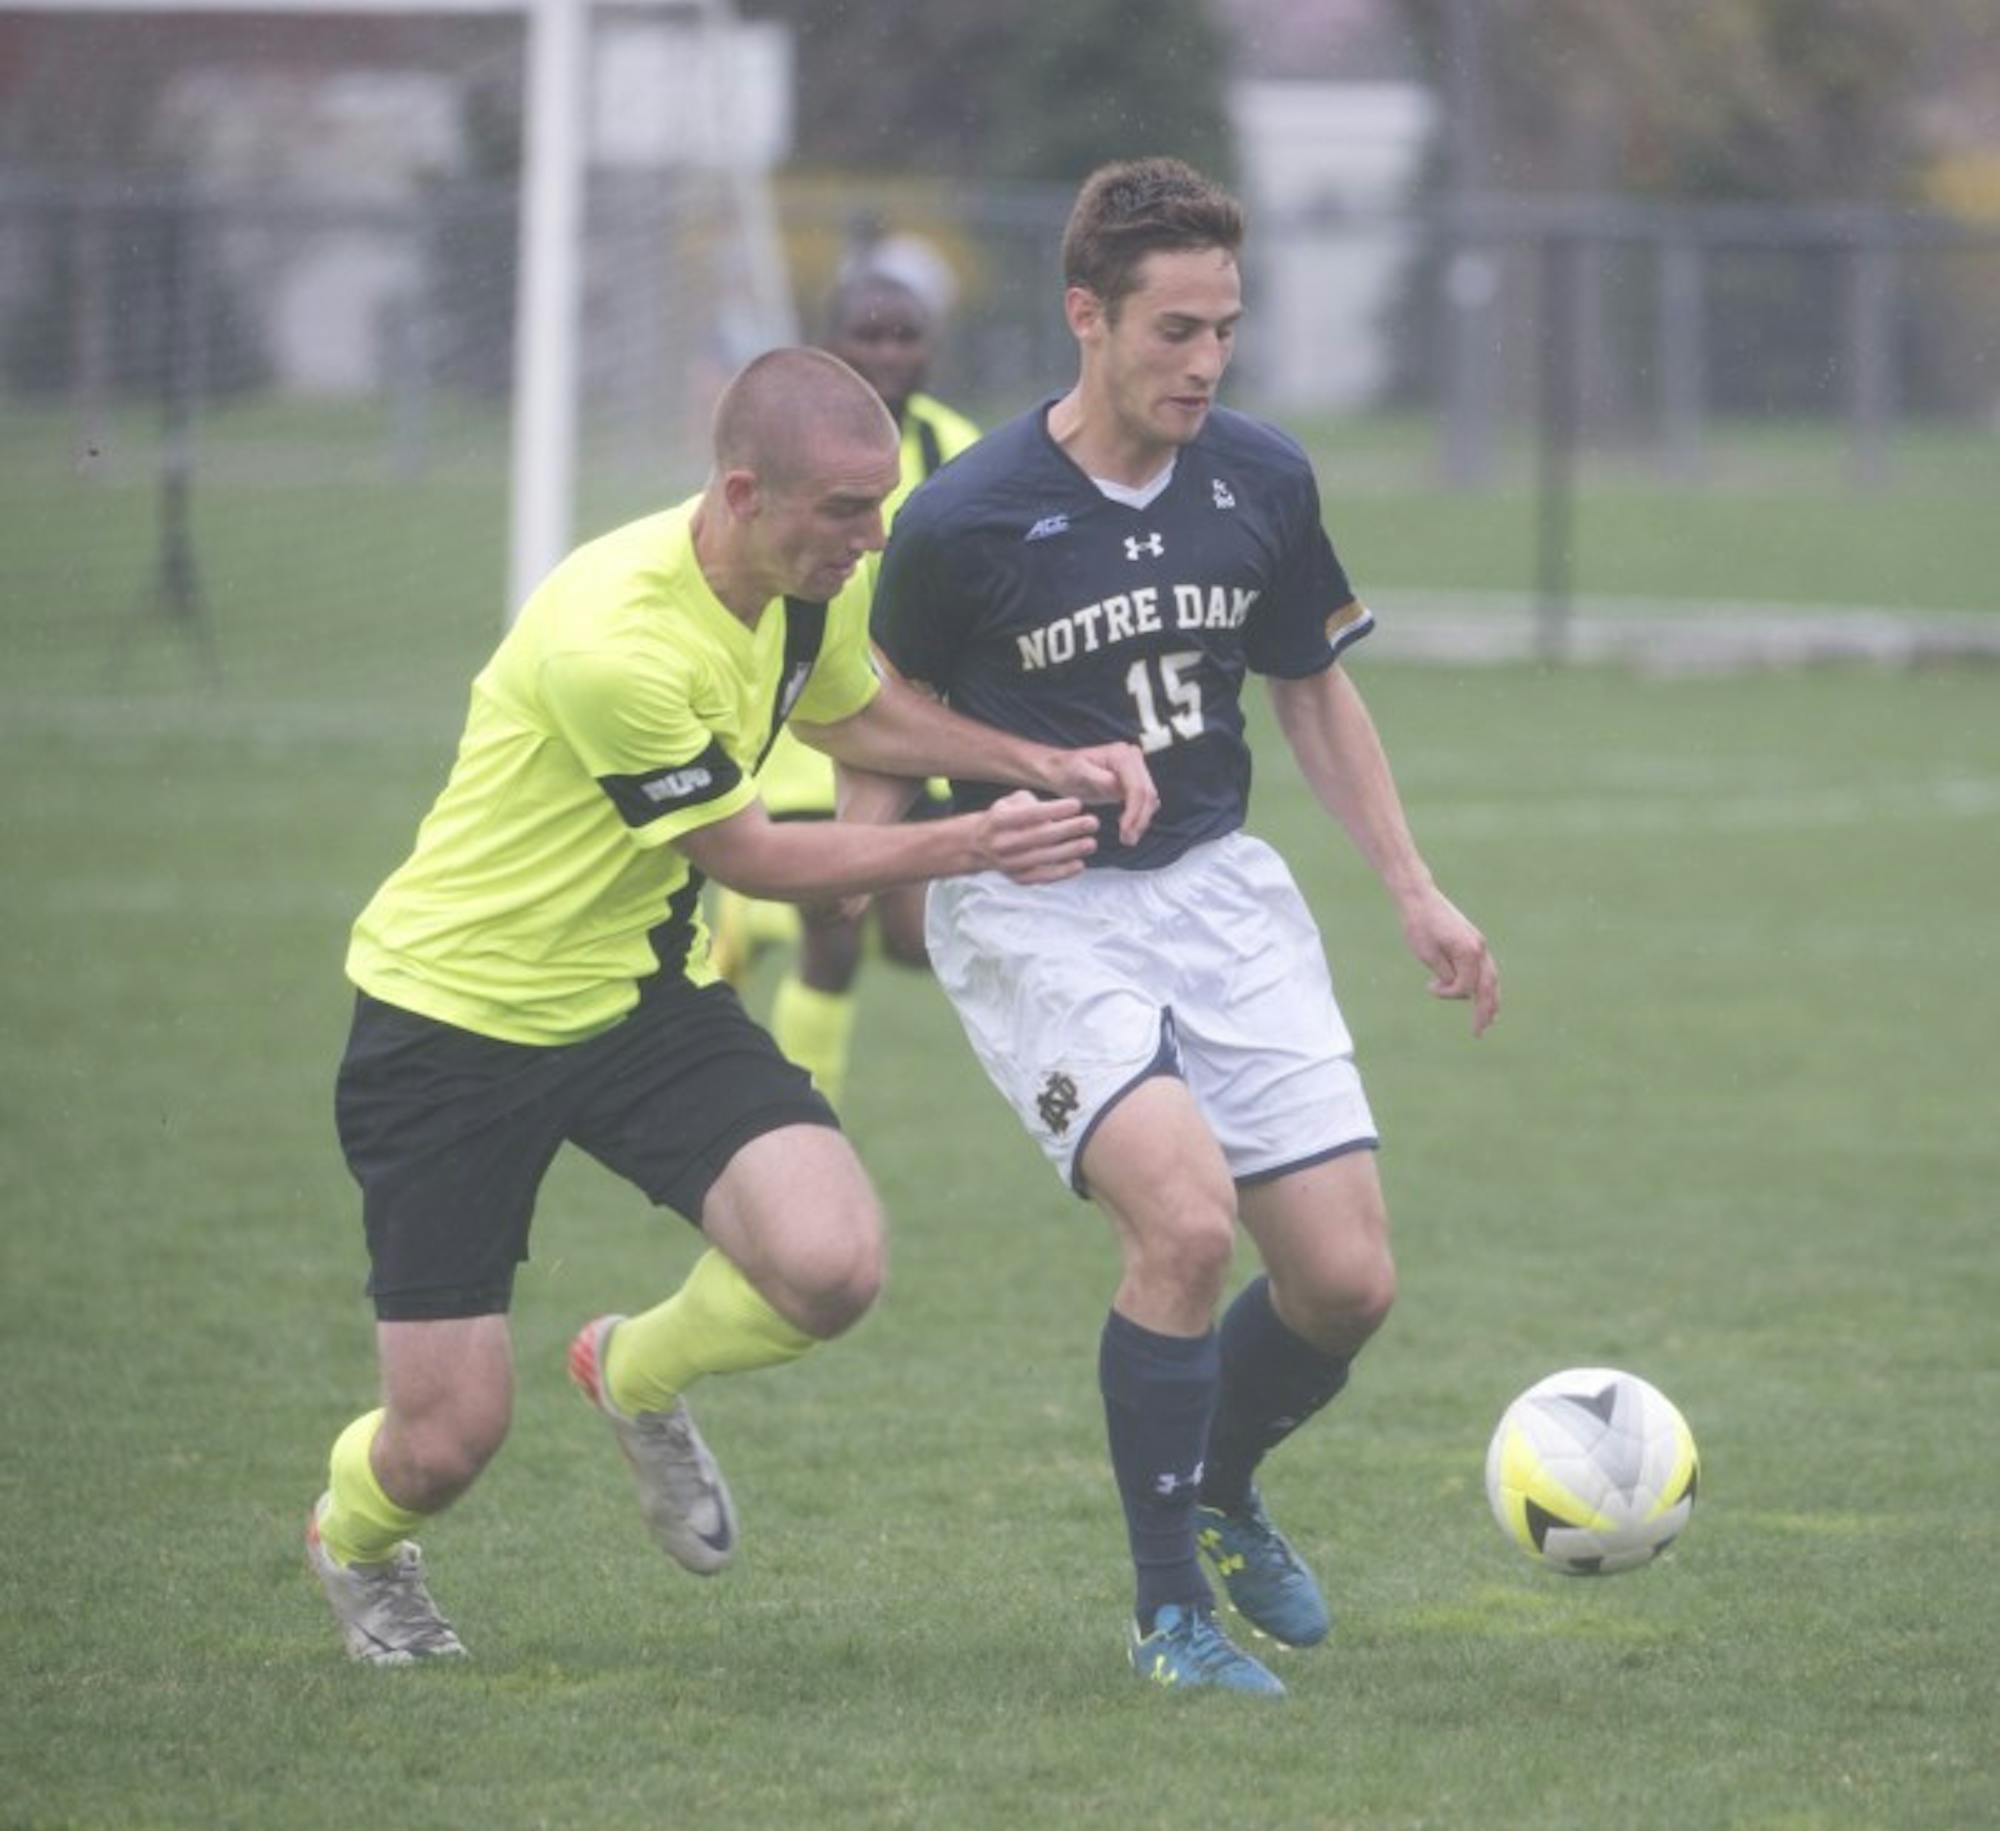 Senior midfielder Evan Panken dribbles away from a defender during a Spring exhibition game against Valparaiso on April 19. Panken had one goal in Friday’s win against Virginia.